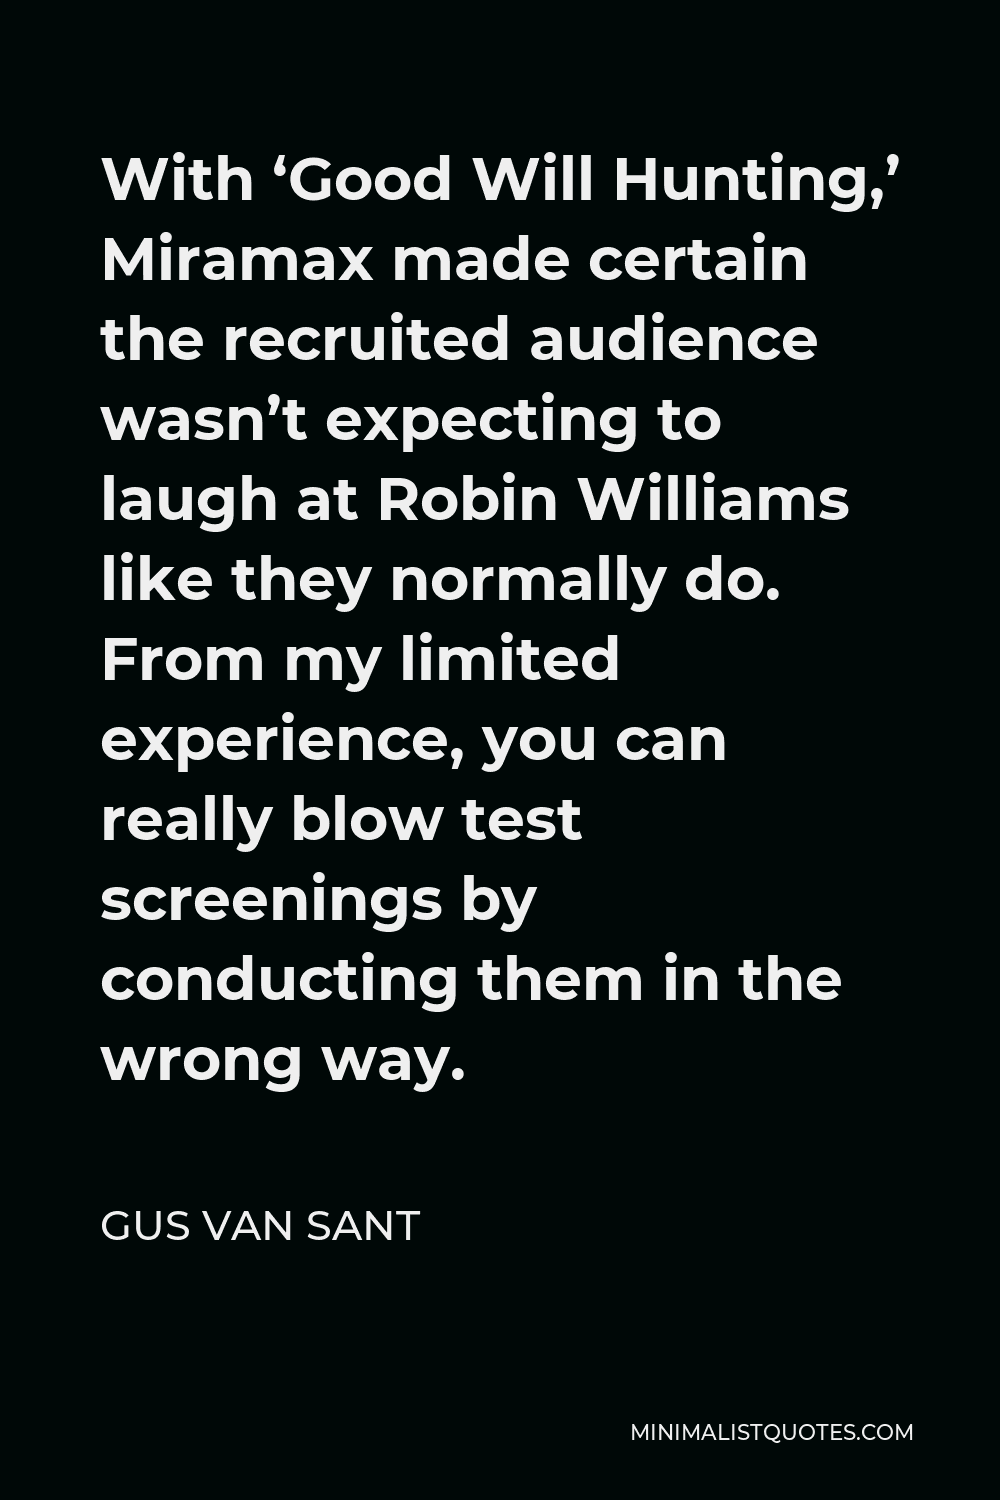 Gus Van Sant Quote - With ‘Good Will Hunting,’ Miramax made certain the recruited audience wasn’t expecting to laugh at Robin Williams like they normally do. From my limited experience, you can really blow test screenings by conducting them in the wrong way.